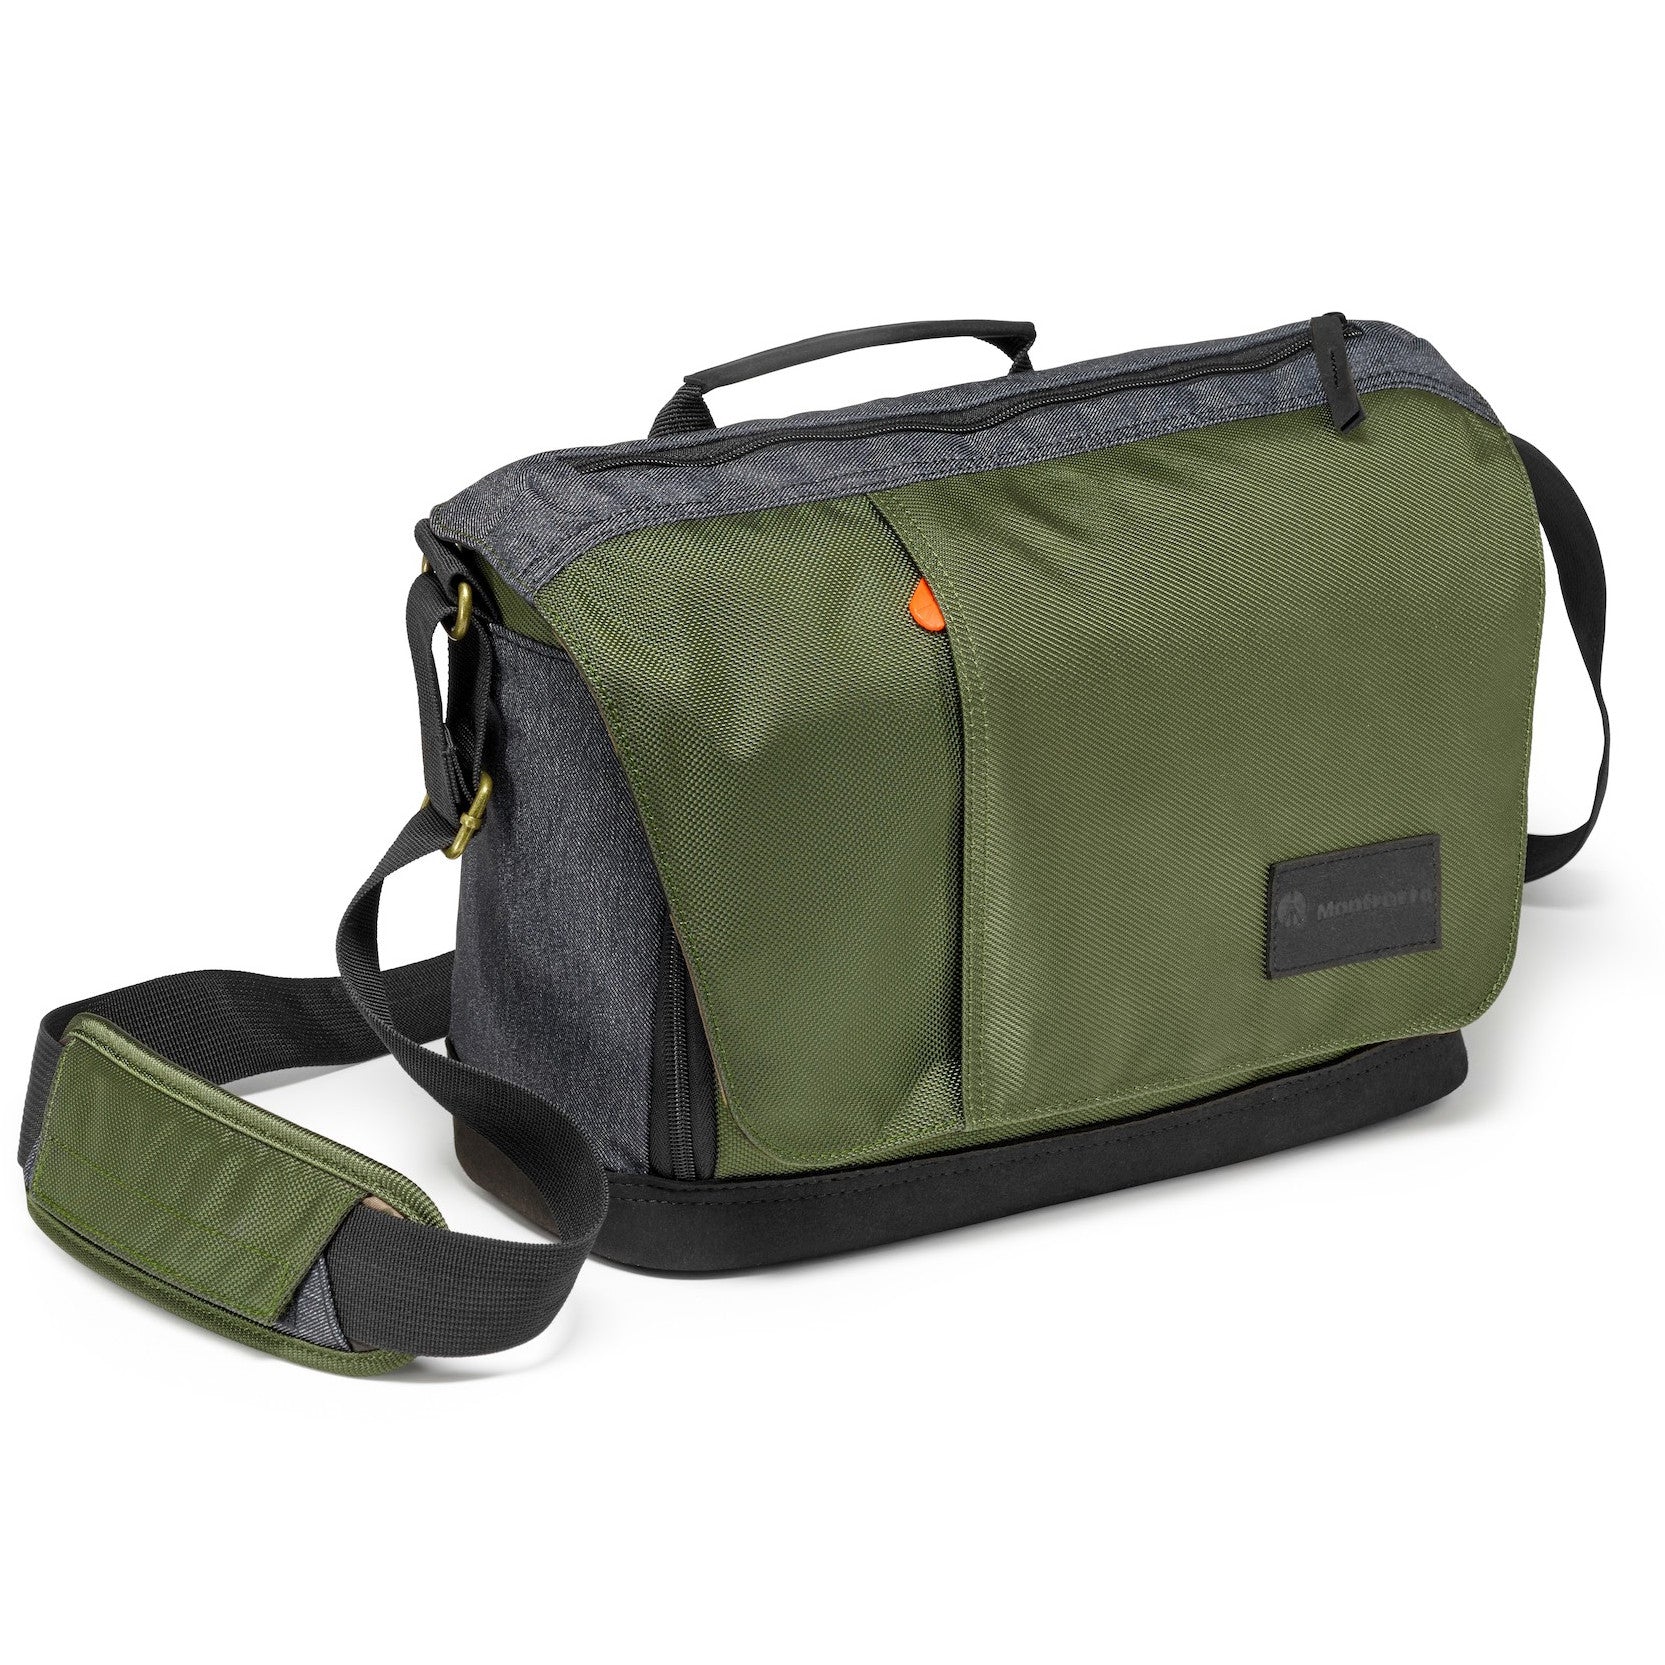 Manfrotto Street Messenger Bag for CSC or DSLR (Green and Grey), bags shoulder bags, Manfrotto - Pictureline  - 1